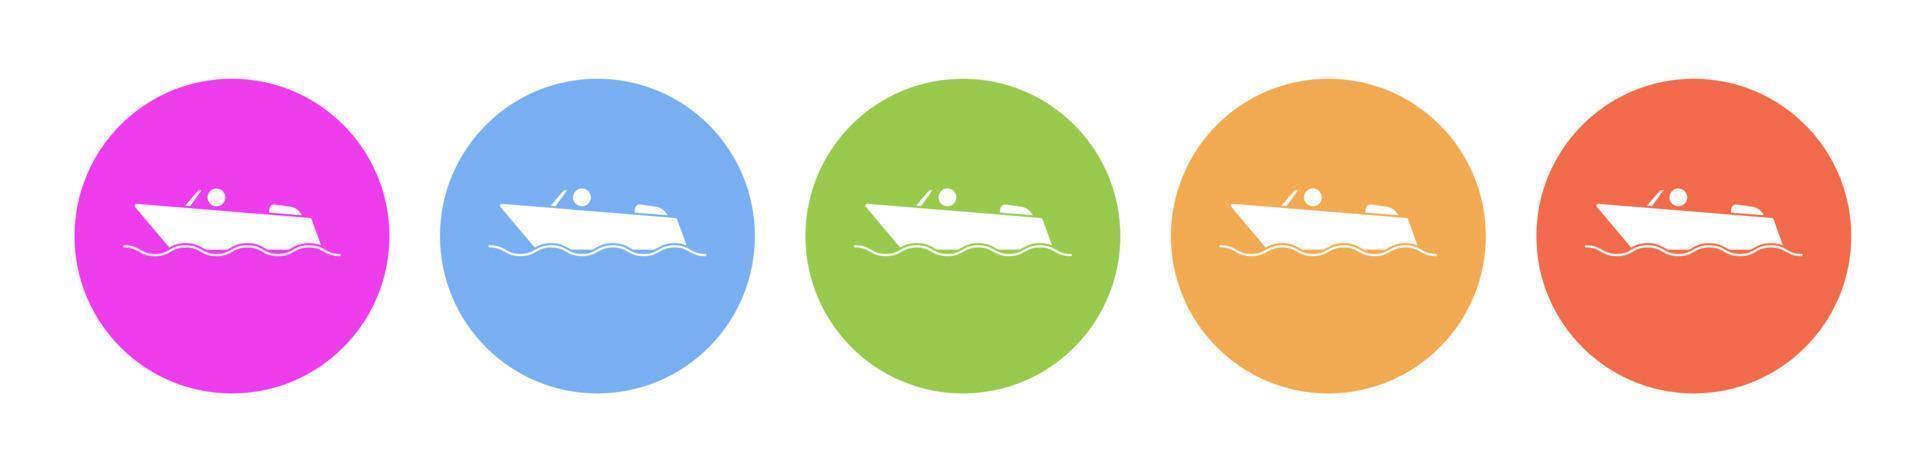 Multi colored flat icons on round backgrounds. Boat multicolor circle vector icon on white background